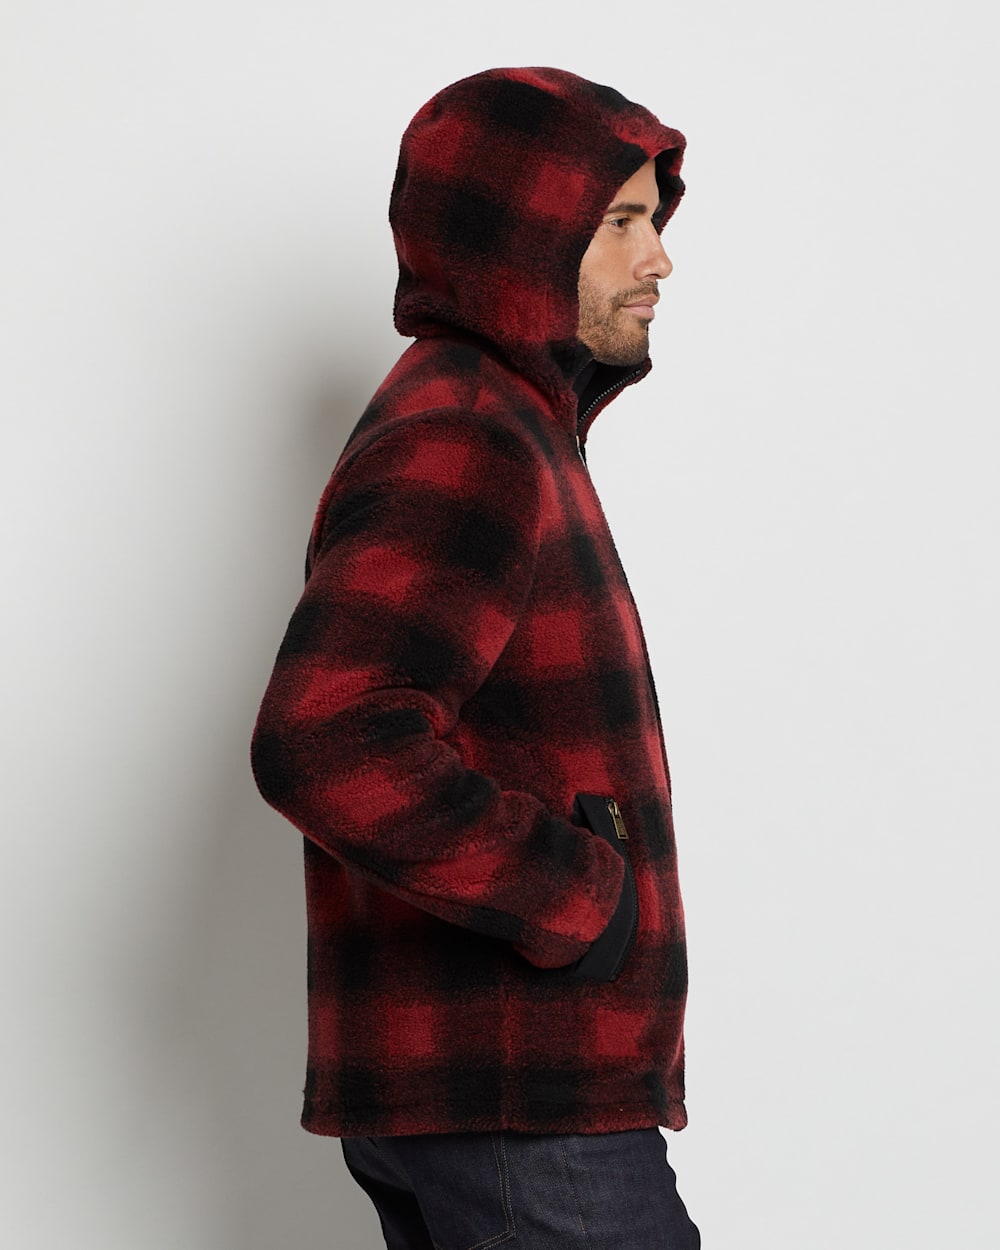 ALTERNATE VIEW OF MEN'S WOODSIDE HOODED FLEECE JACKET IN RED BUFFALO CHECK image number 6